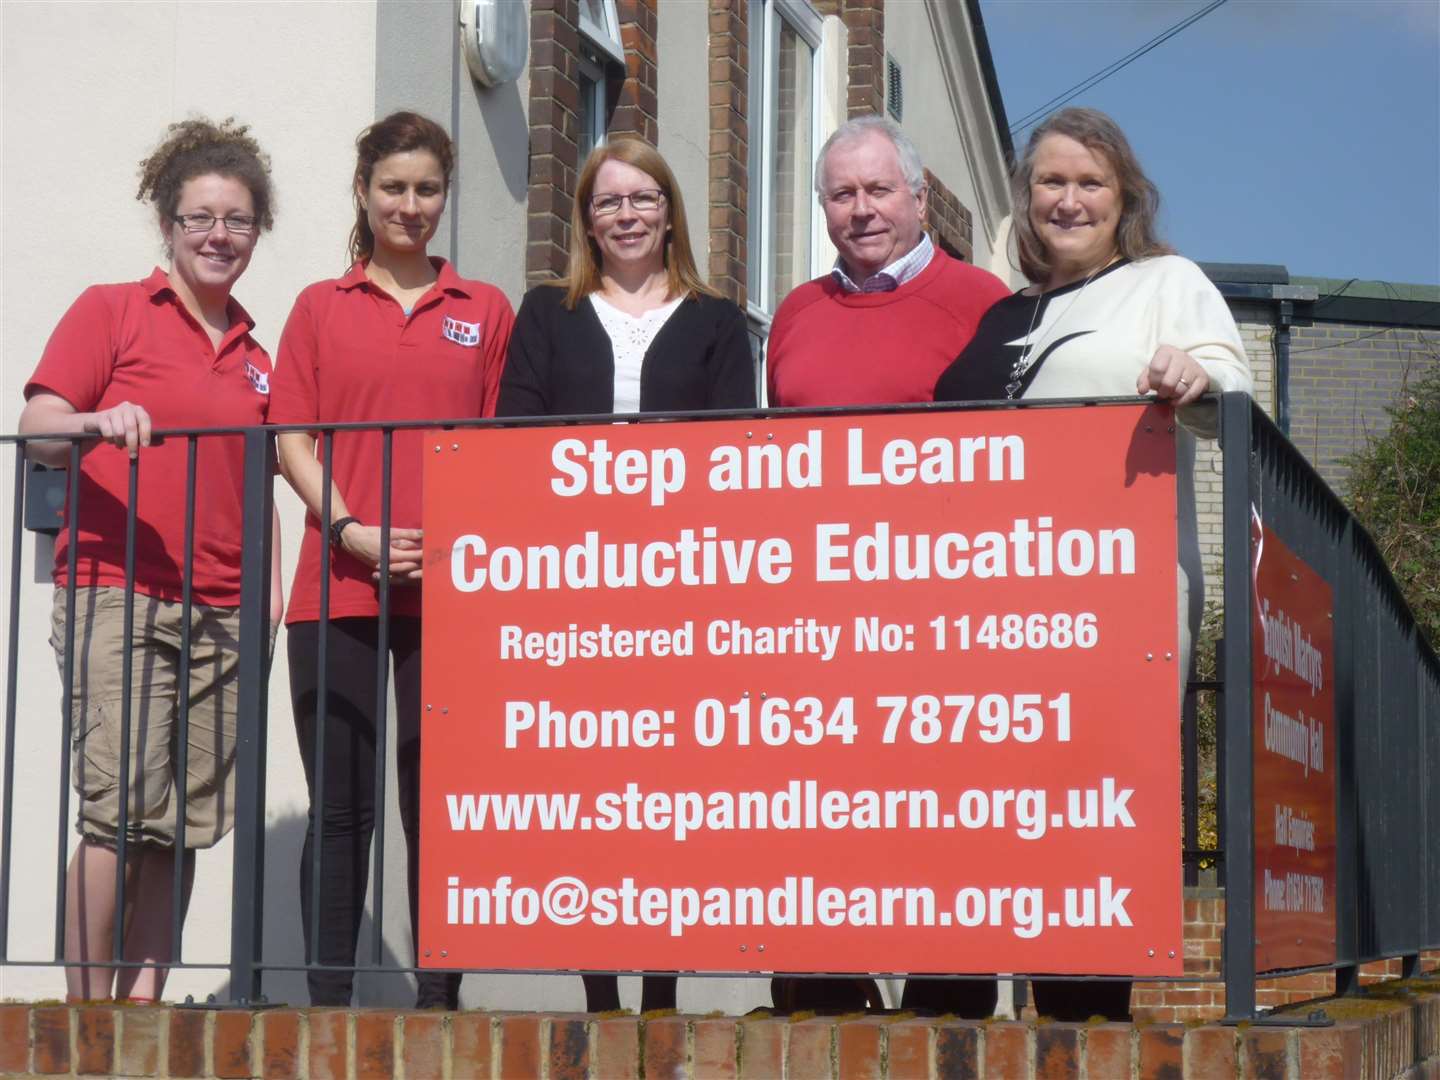 Staff at the Step and Learn charity with Cllr Jane Etheridge, who has supported the charity